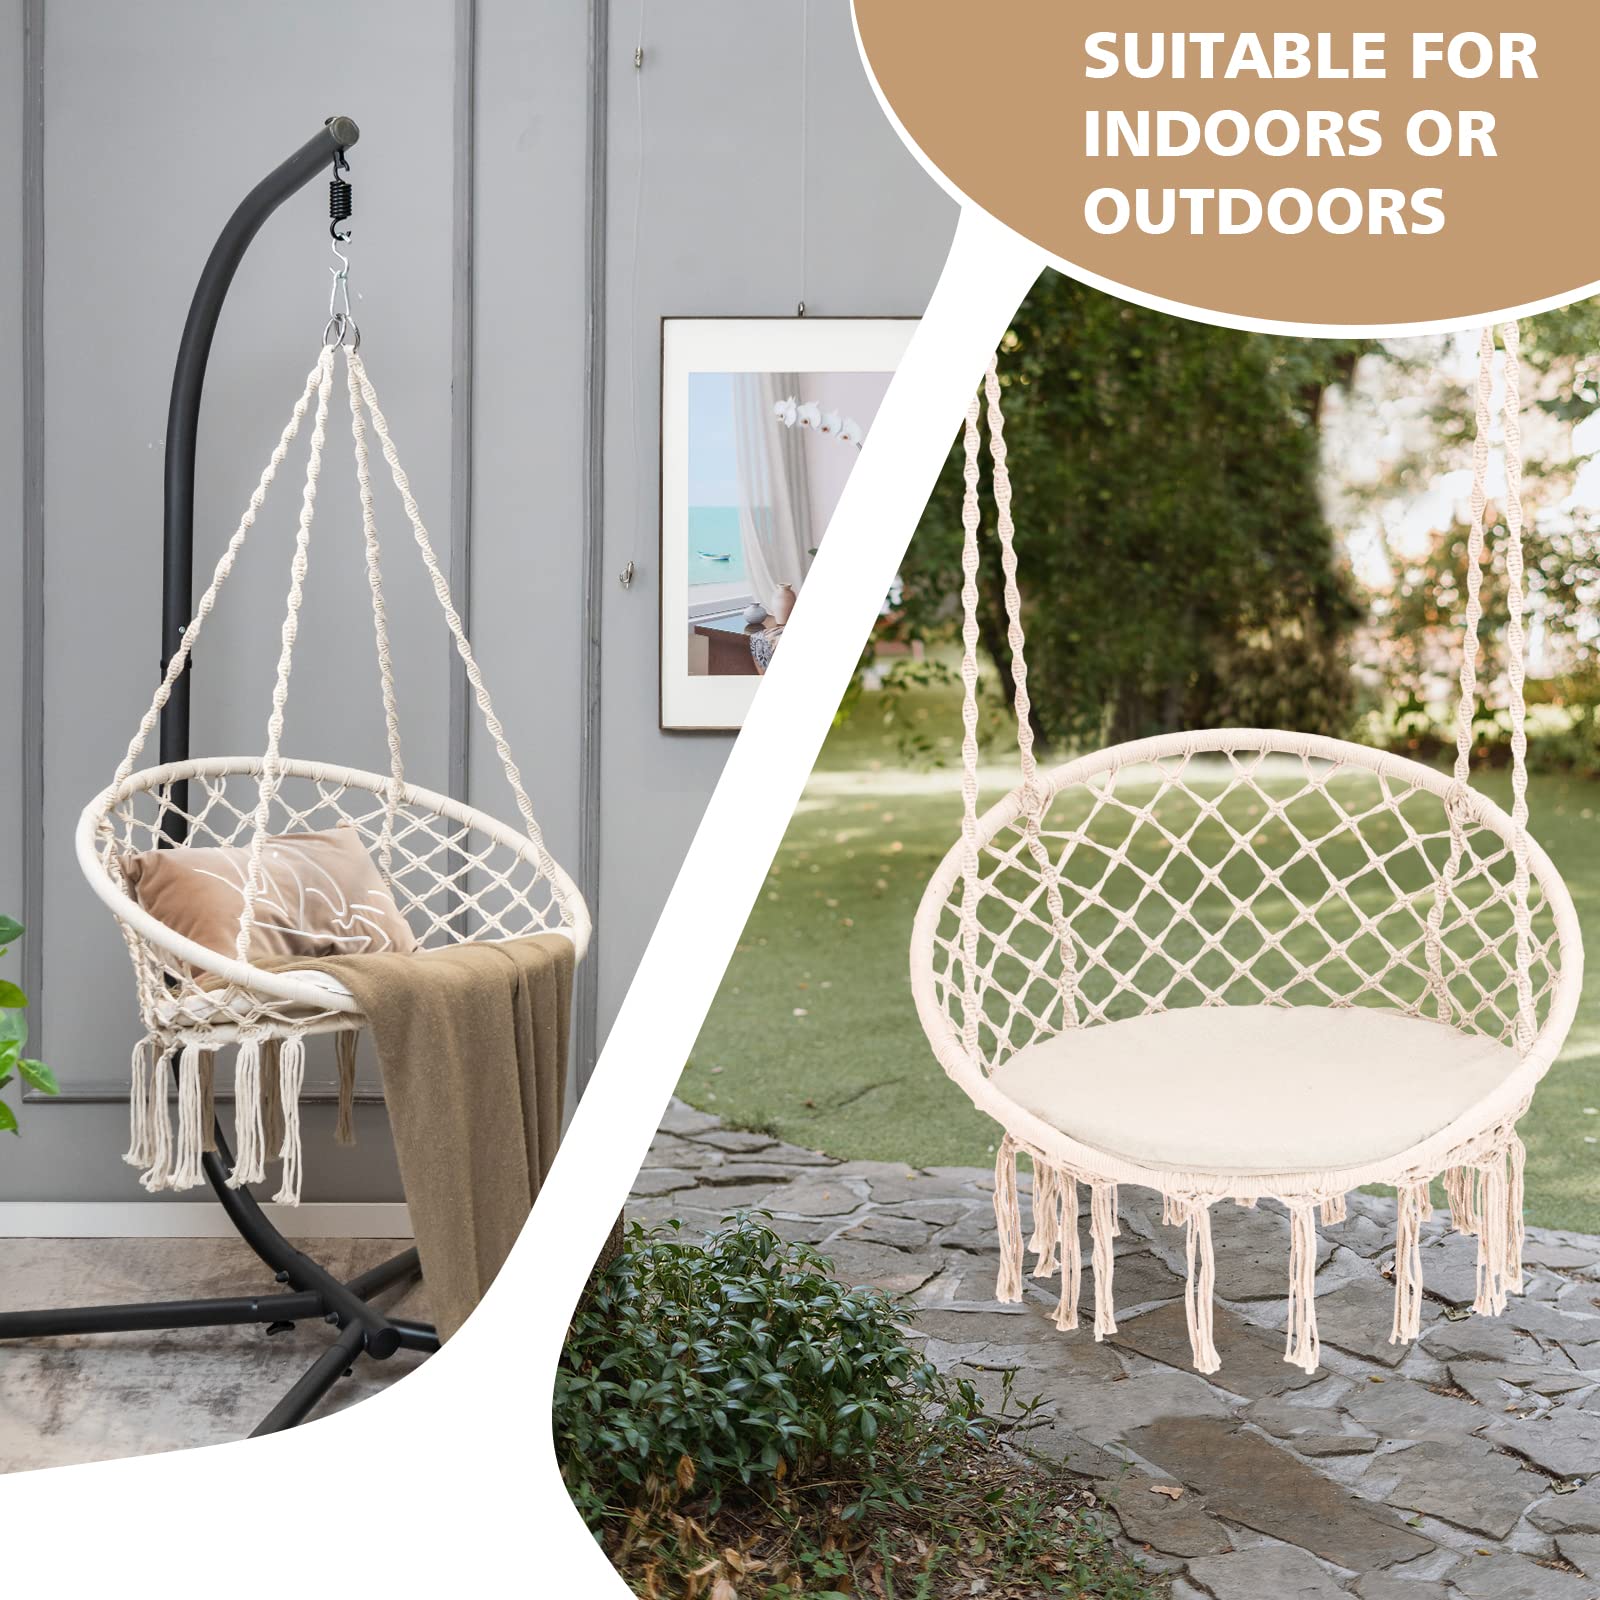 Giantex Hammock Chair Macrame Swing - Hanging Chair with Cushion and Hardware Kit, 330 LBS Weight Capacity